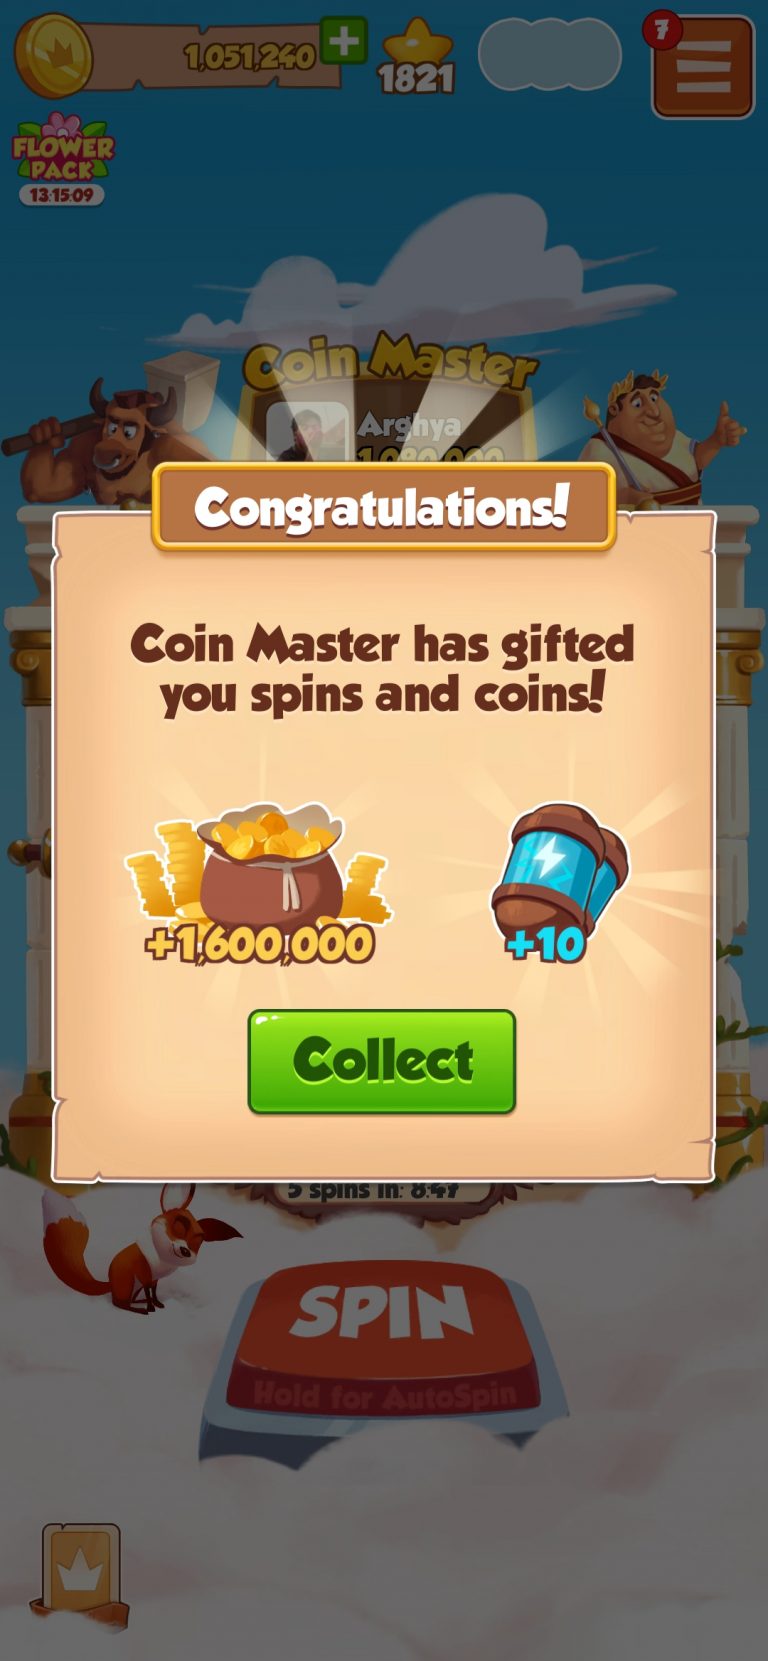 coin master free coins spins daily summary